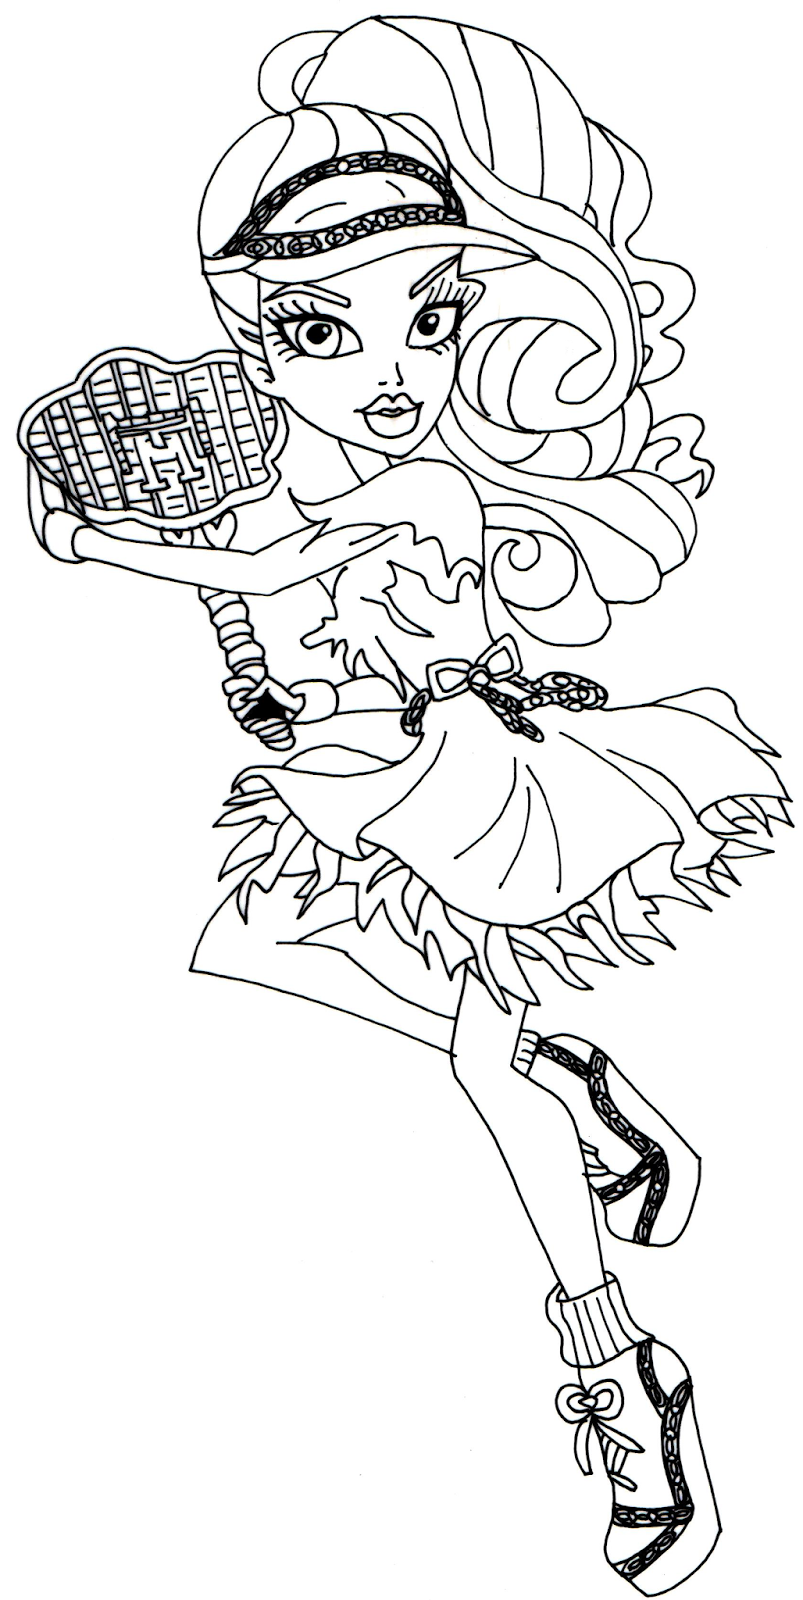 Download Spectra Vondergeist Ghoul Sports Monster High Coloring Page - Free Coloring Pages Printables for ...